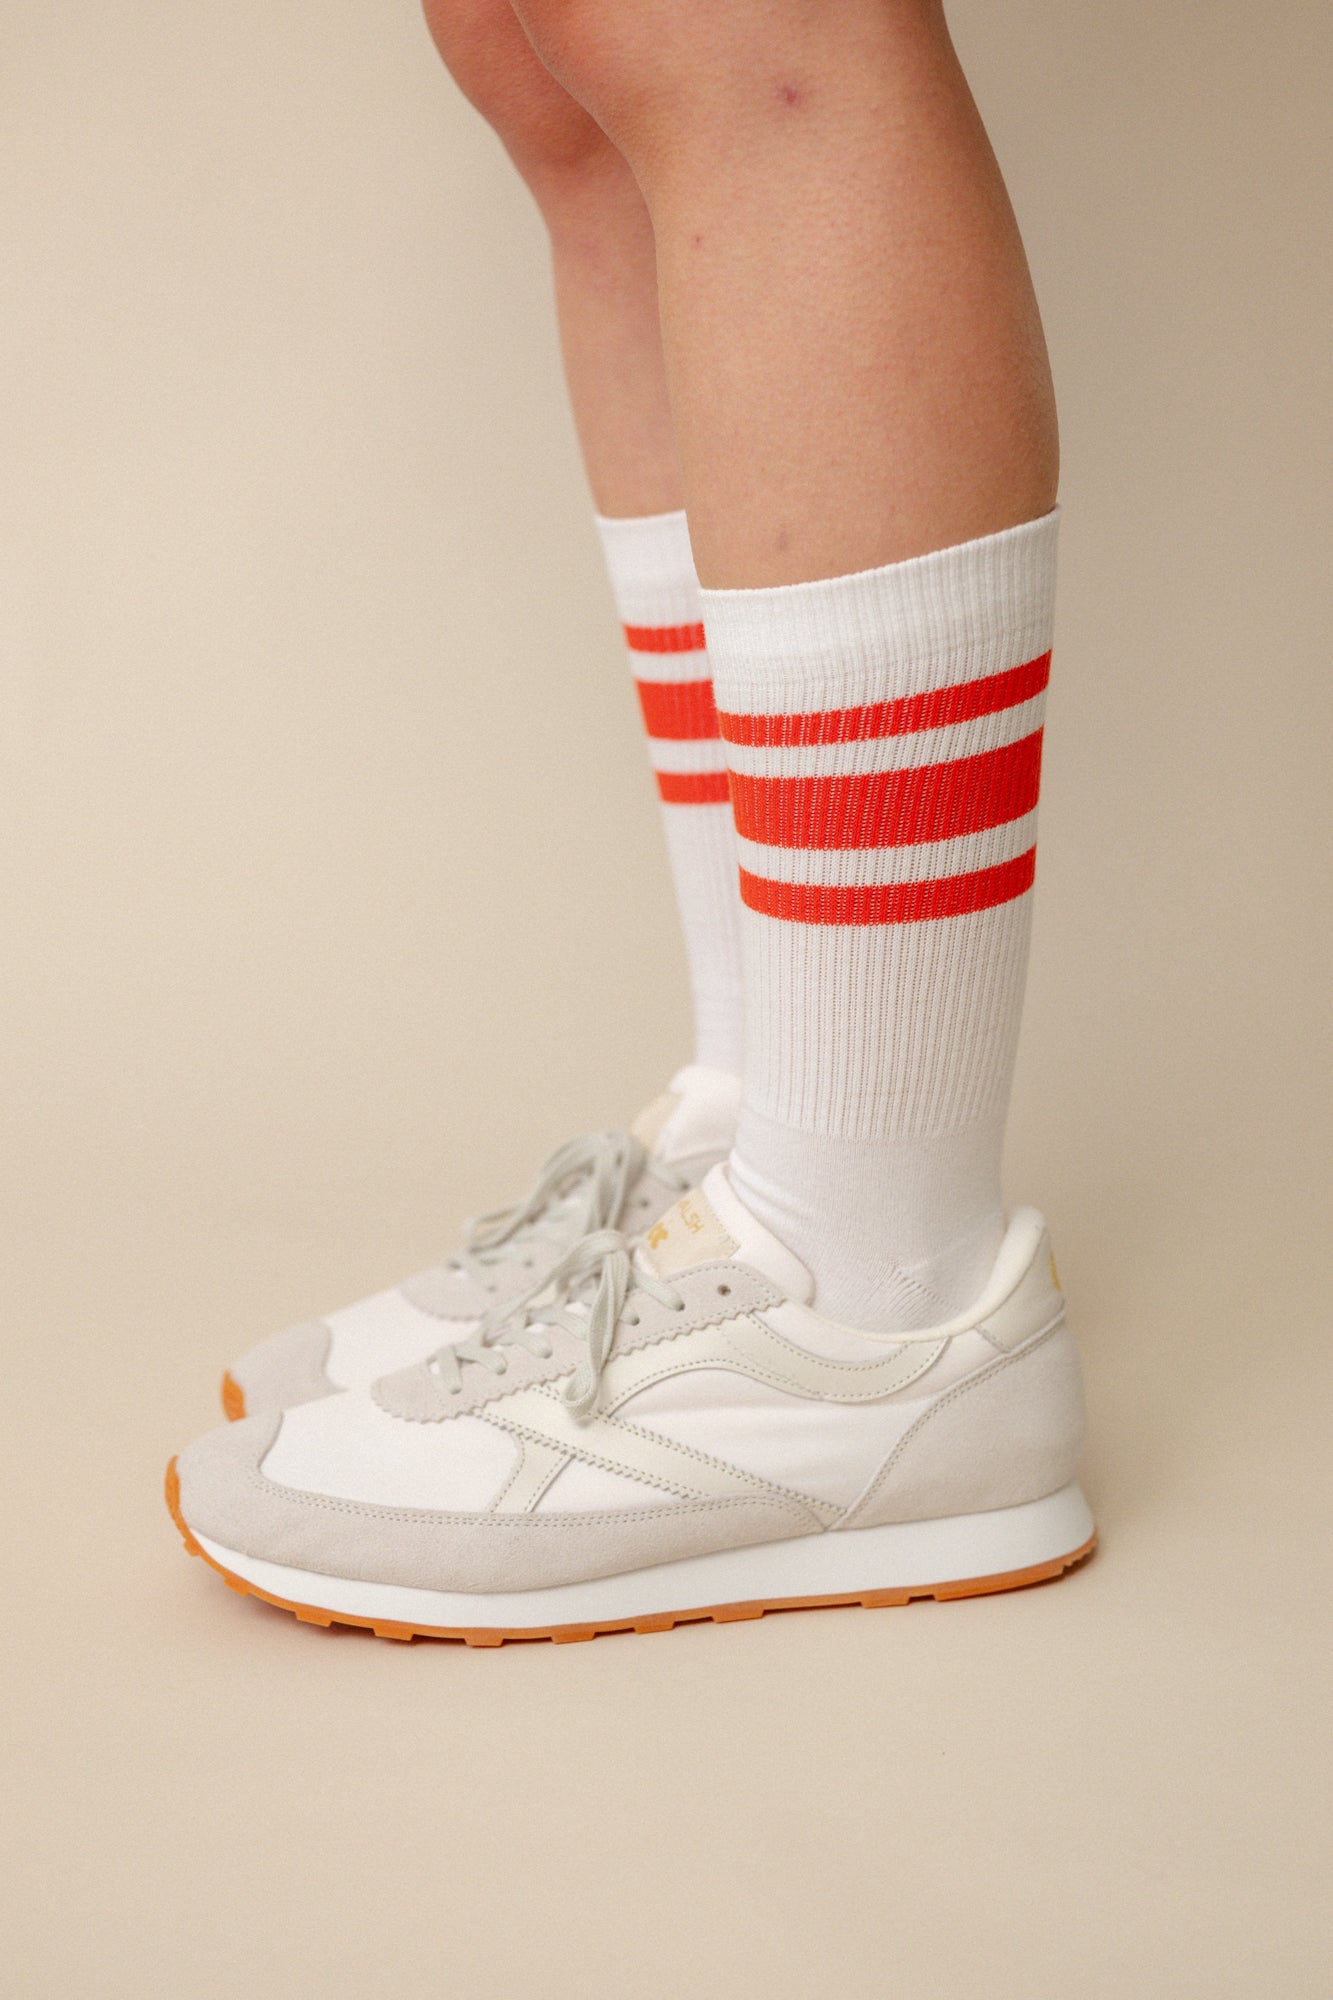 Sports Cotton Sock Calf 3 Pack - White/Flame Red Stripe - Community ...